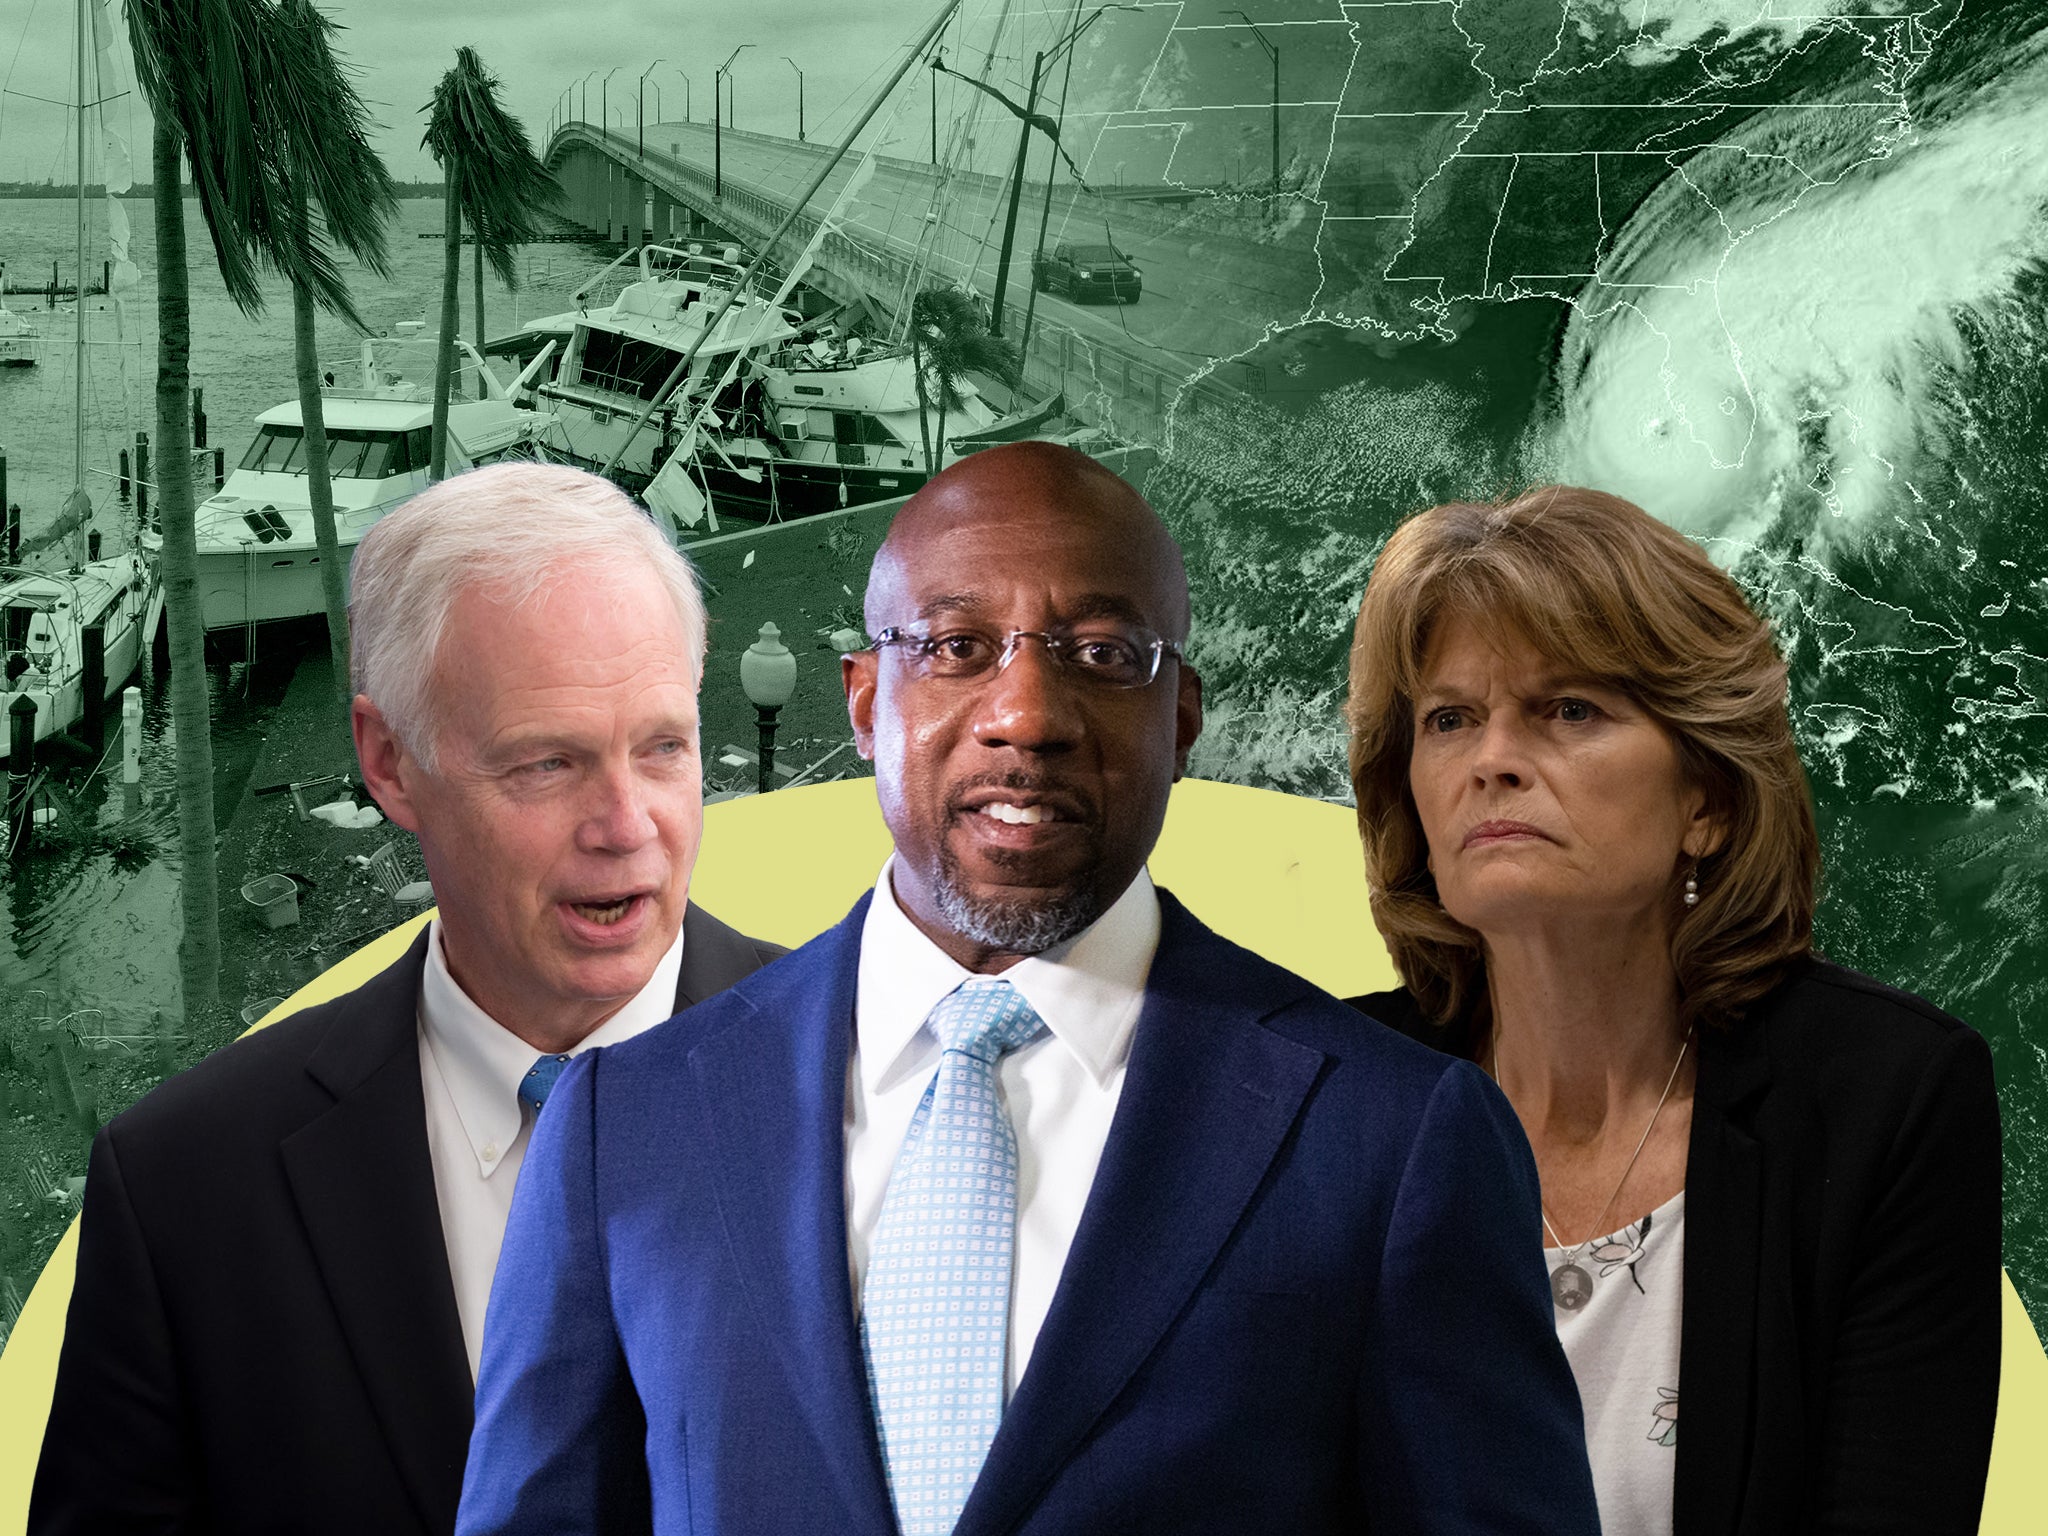 Senators Ron Johnson, Raphael Warnock and Lisa Murkowski are in close races for re-election in races that could determine the future of climate action